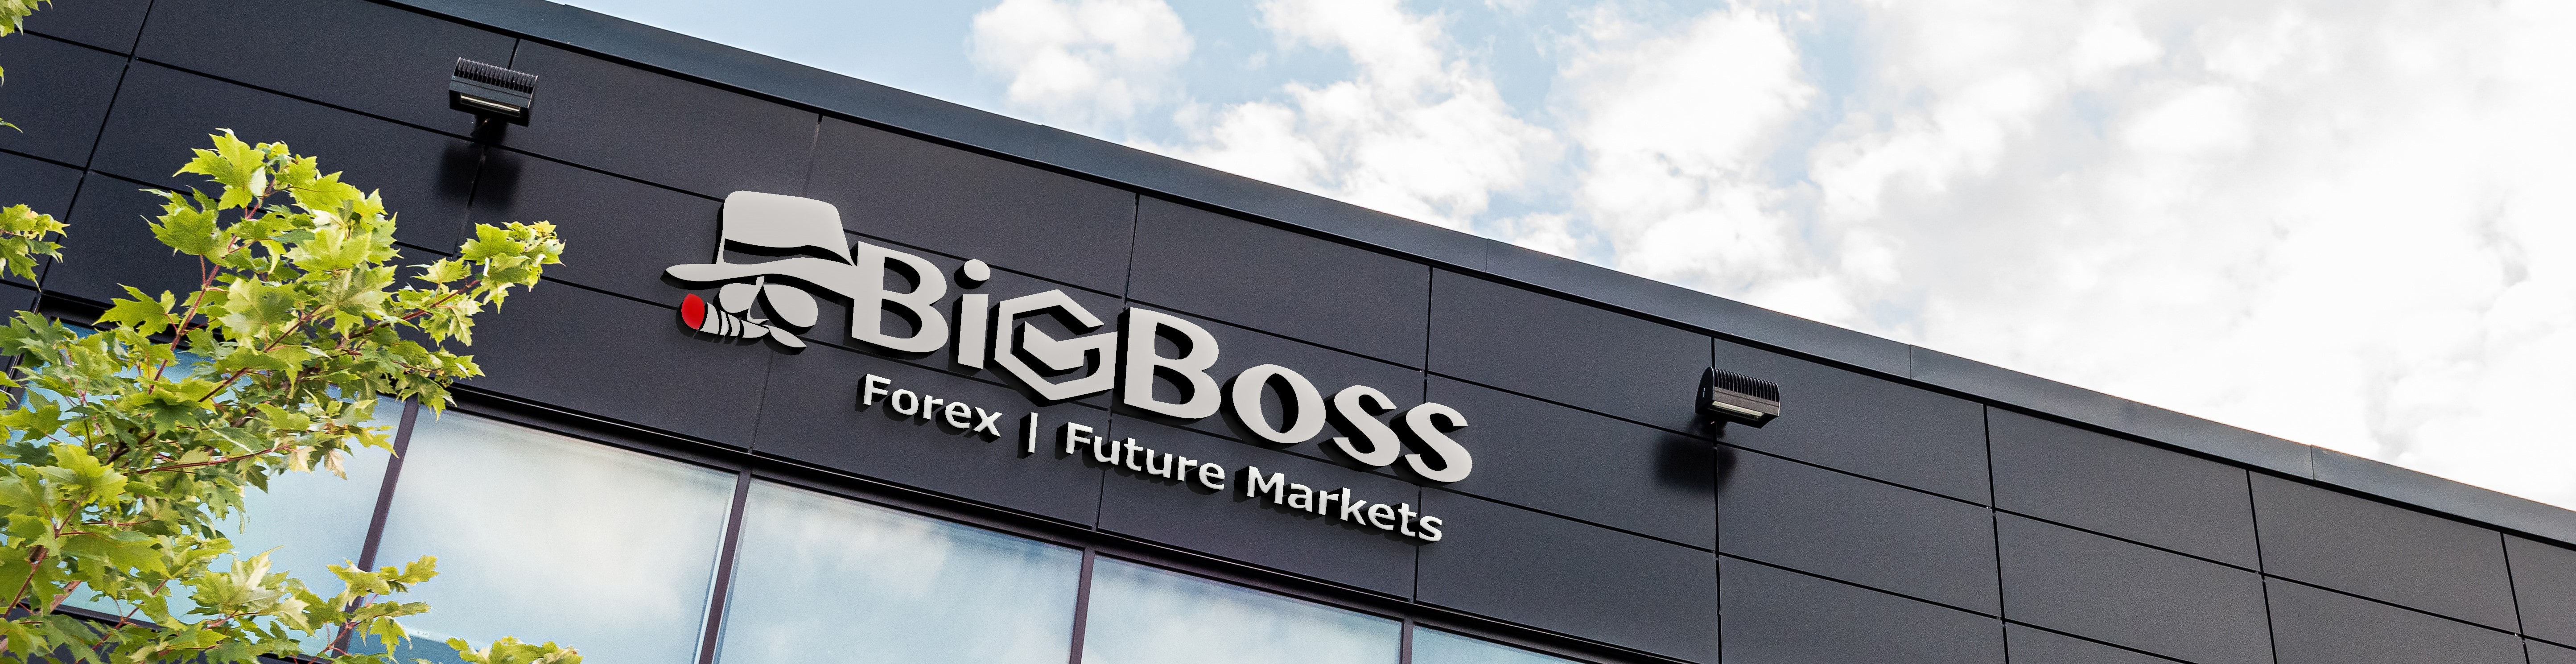 BigBoss - Trade Forex on up to 1111 Leverage and